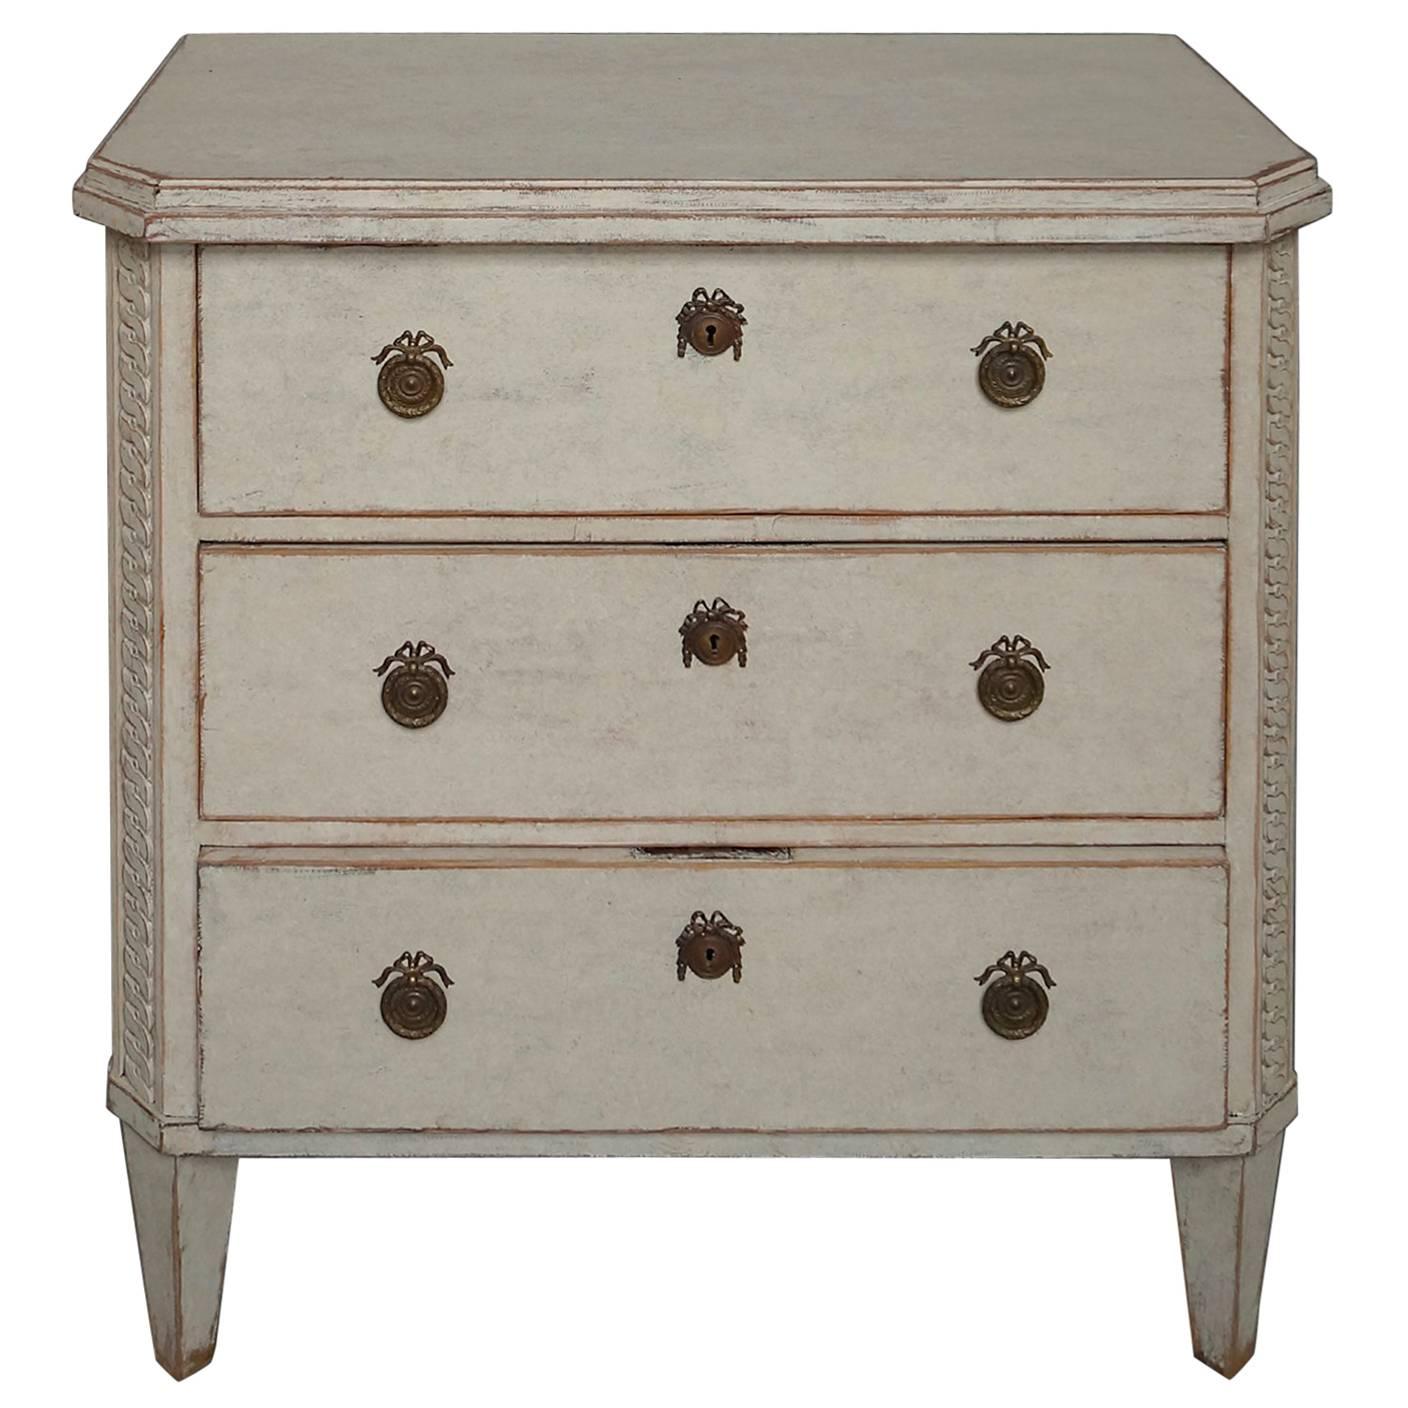 Simple Swedish Neoclassical Style Chest of Drawers